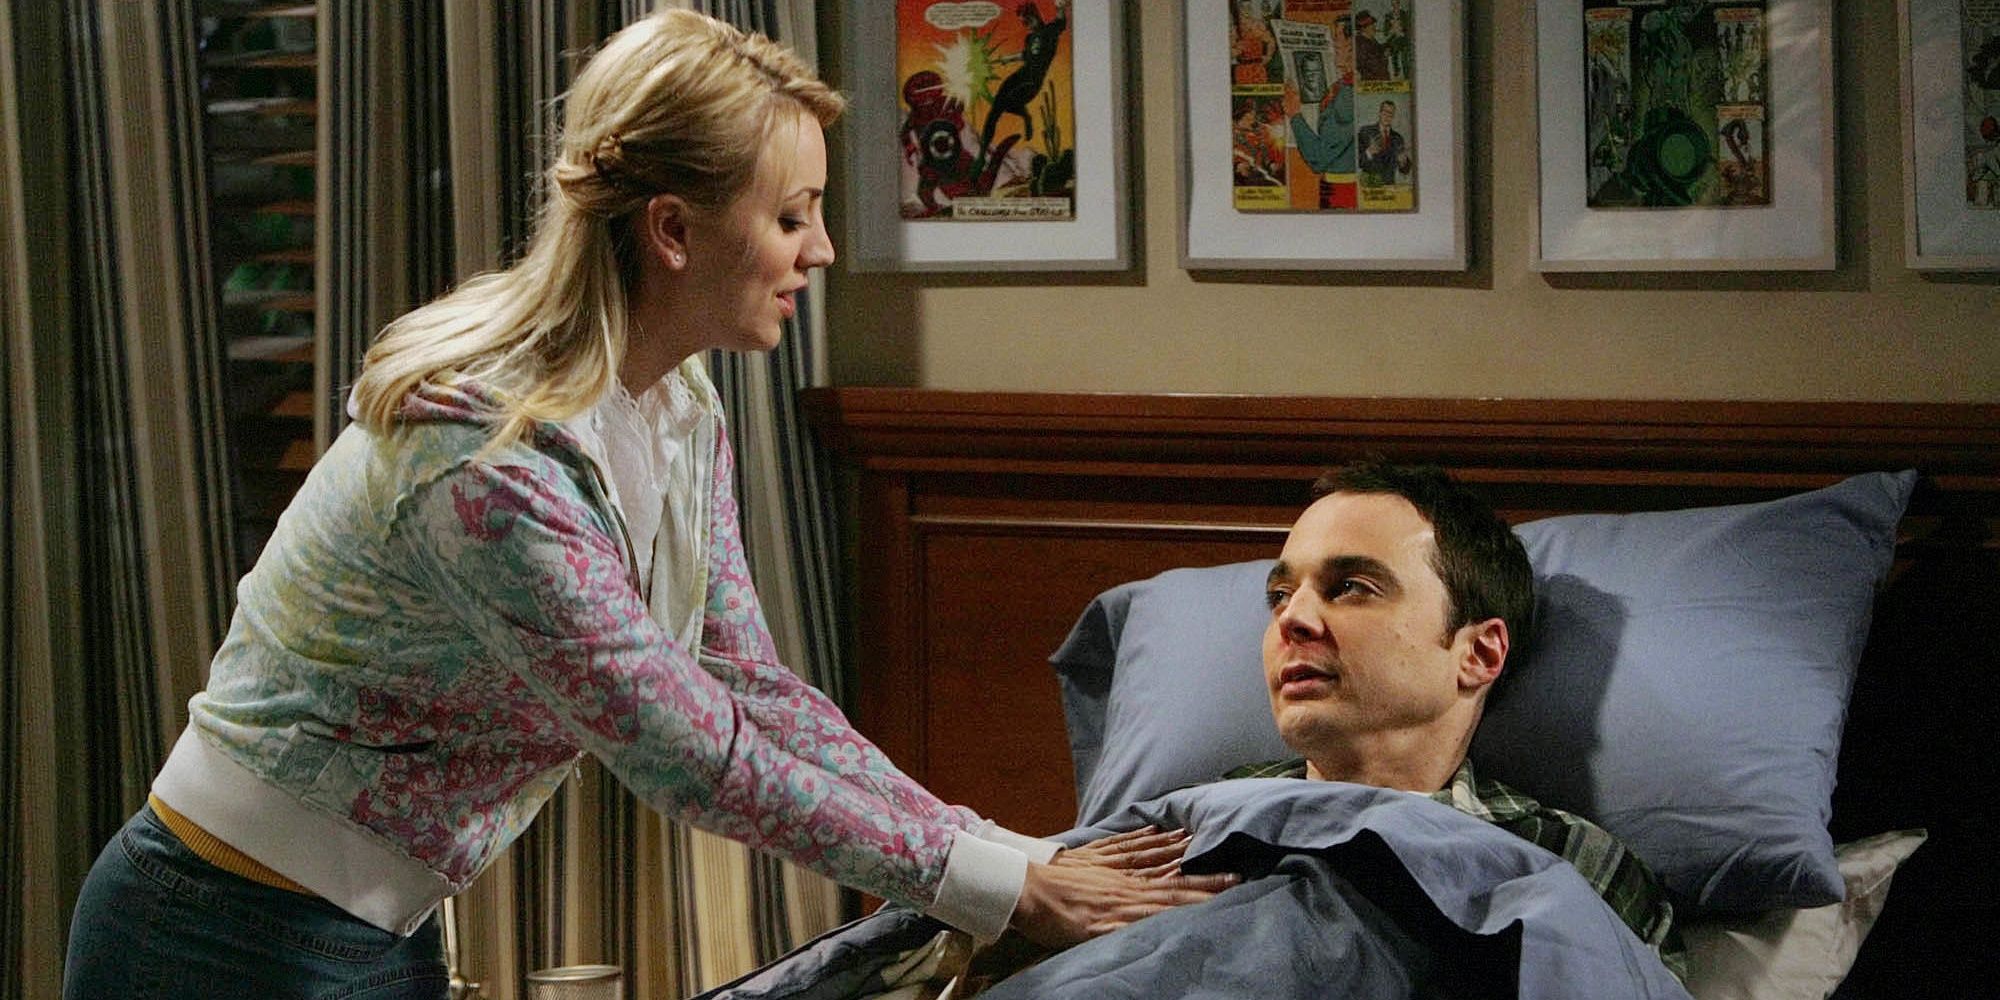 penny tucking sheldon into bed in the big bang theory